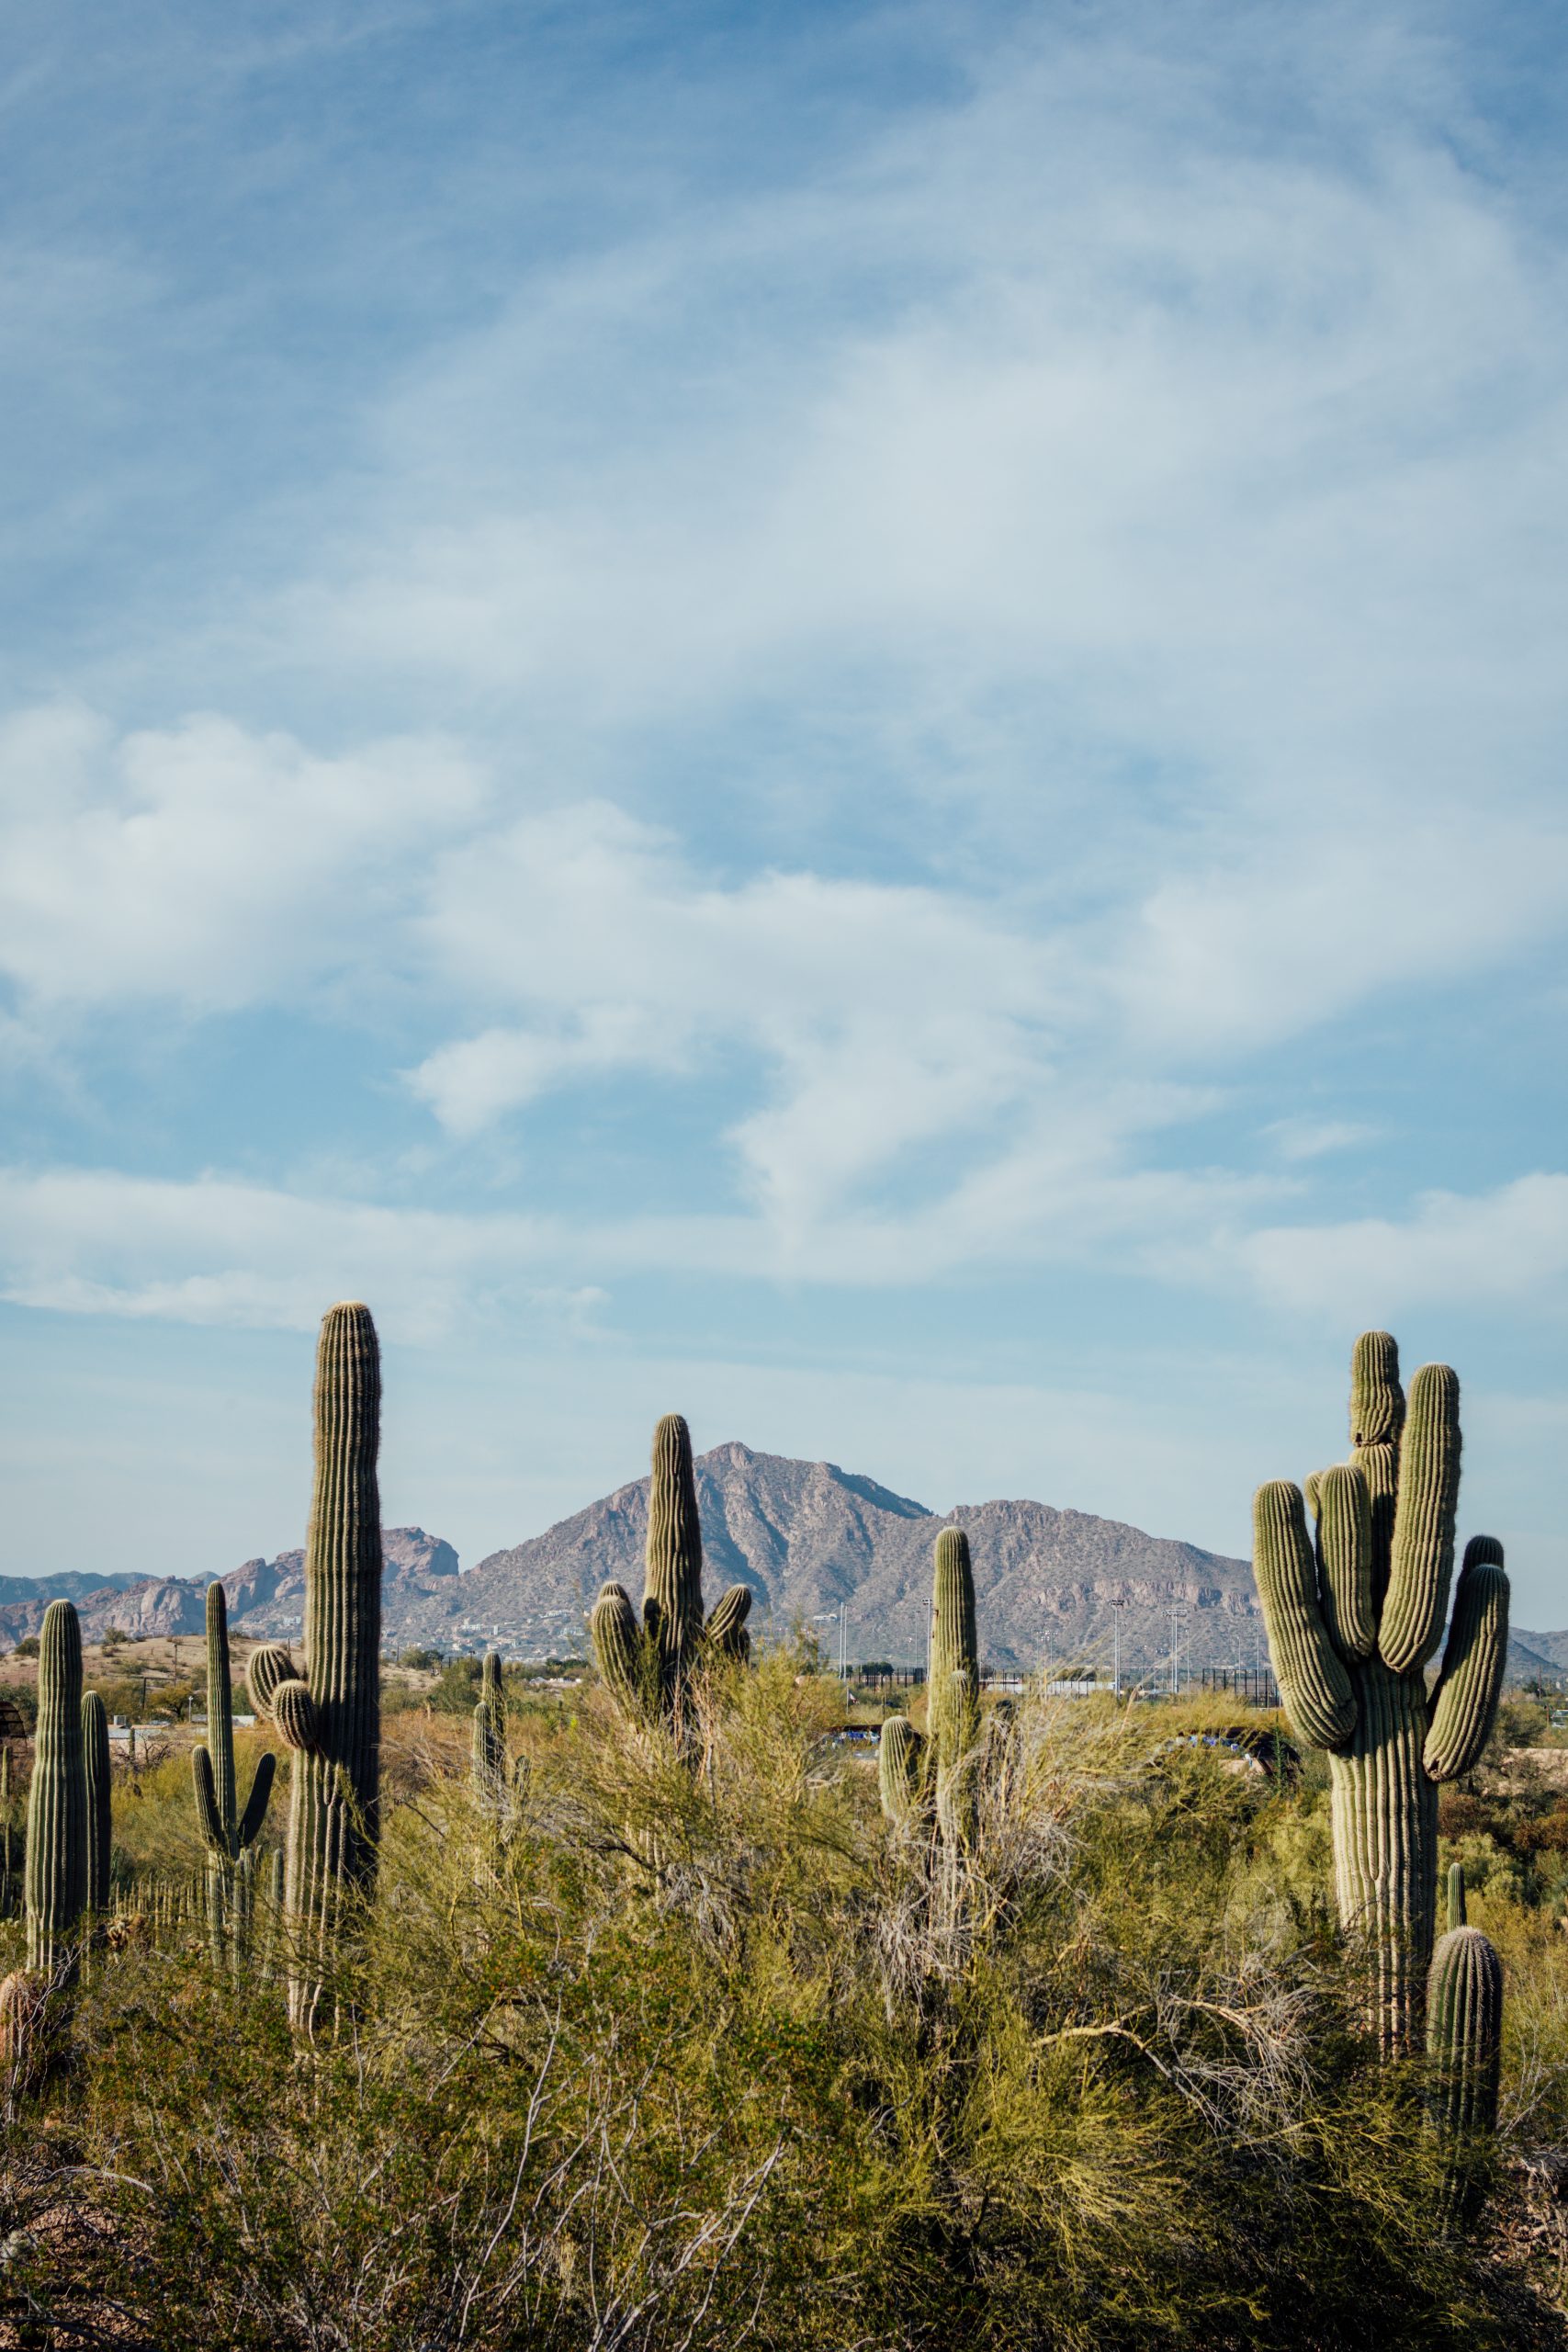 Photo of a mountain in Phoenix with saguaro cacti in the foreground.